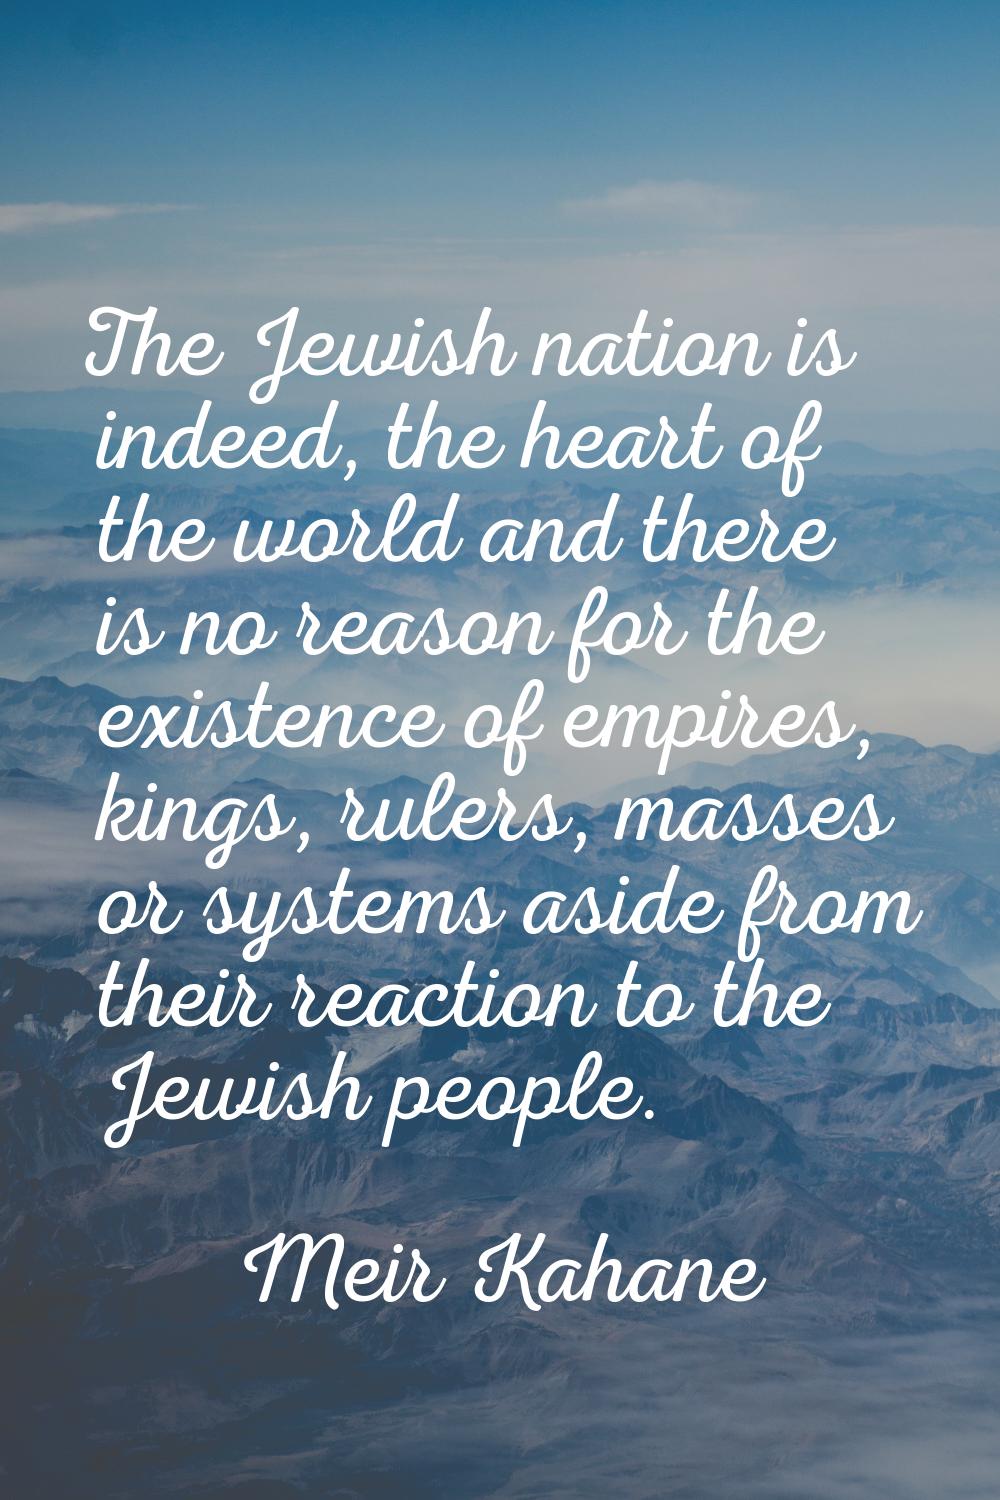 The Jewish nation is indeed, the heart of the world and there is no reason for the existence of emp